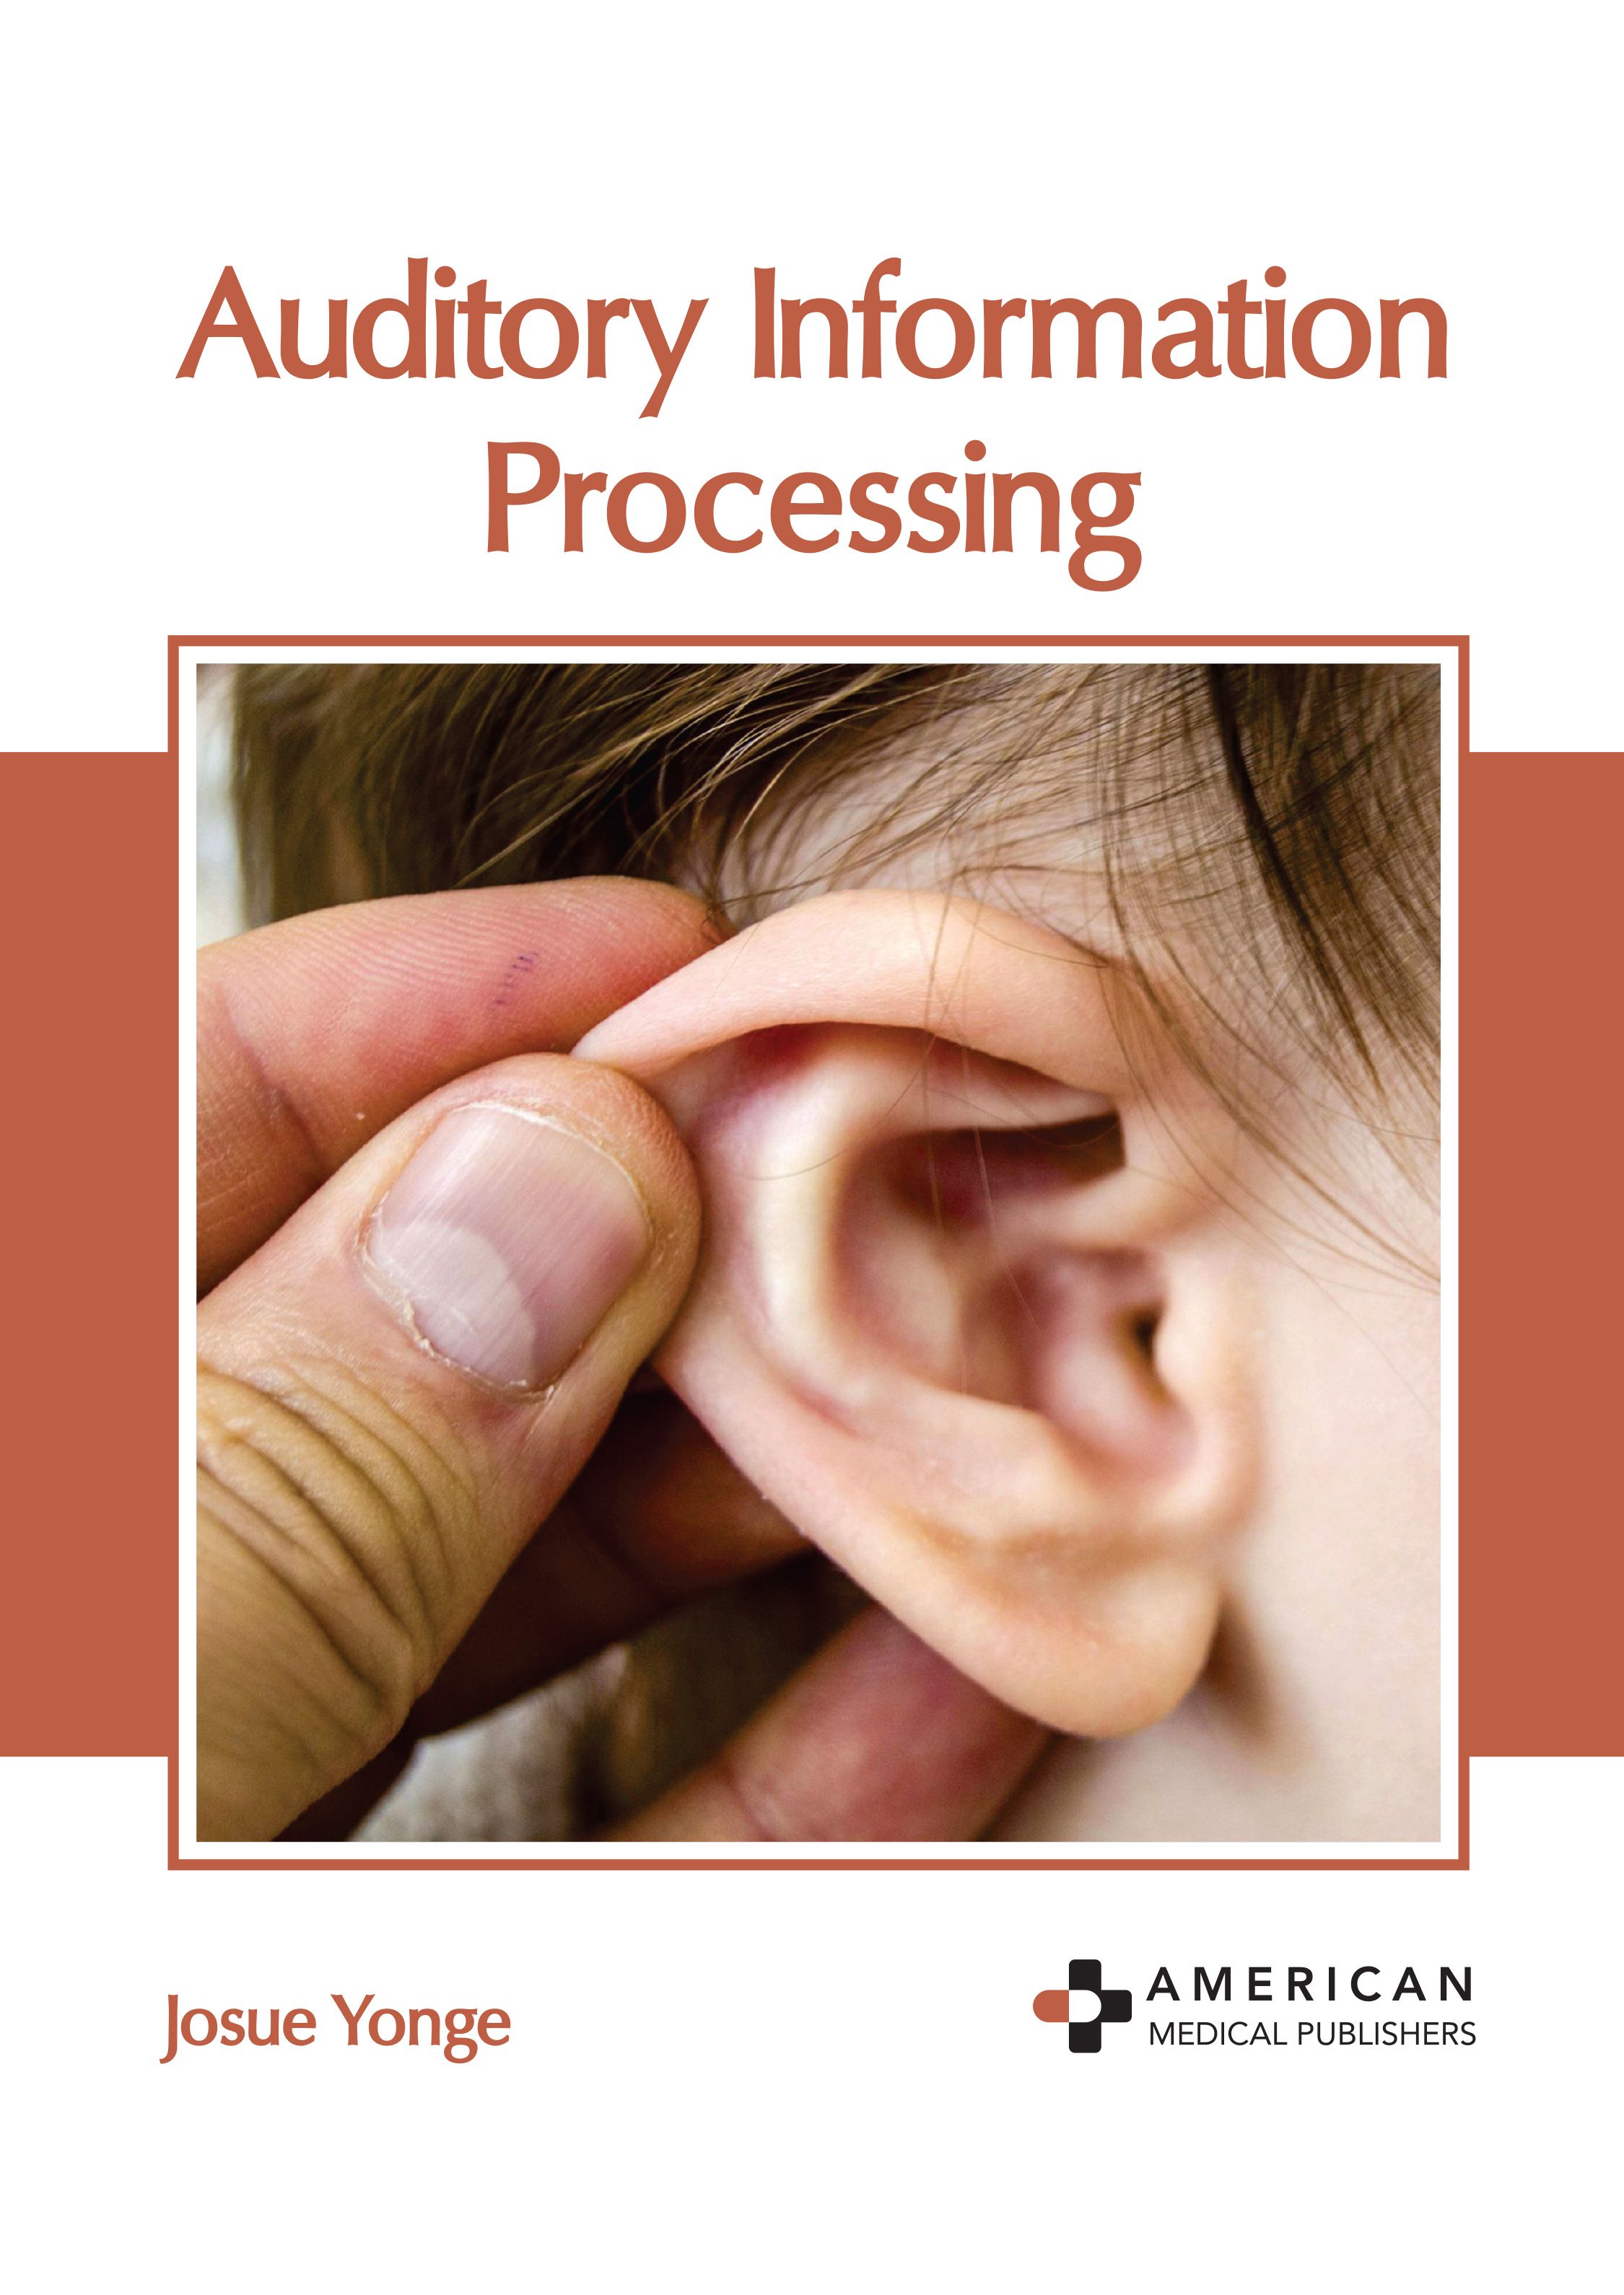 AUDITORY INFORMATION PROCESSING